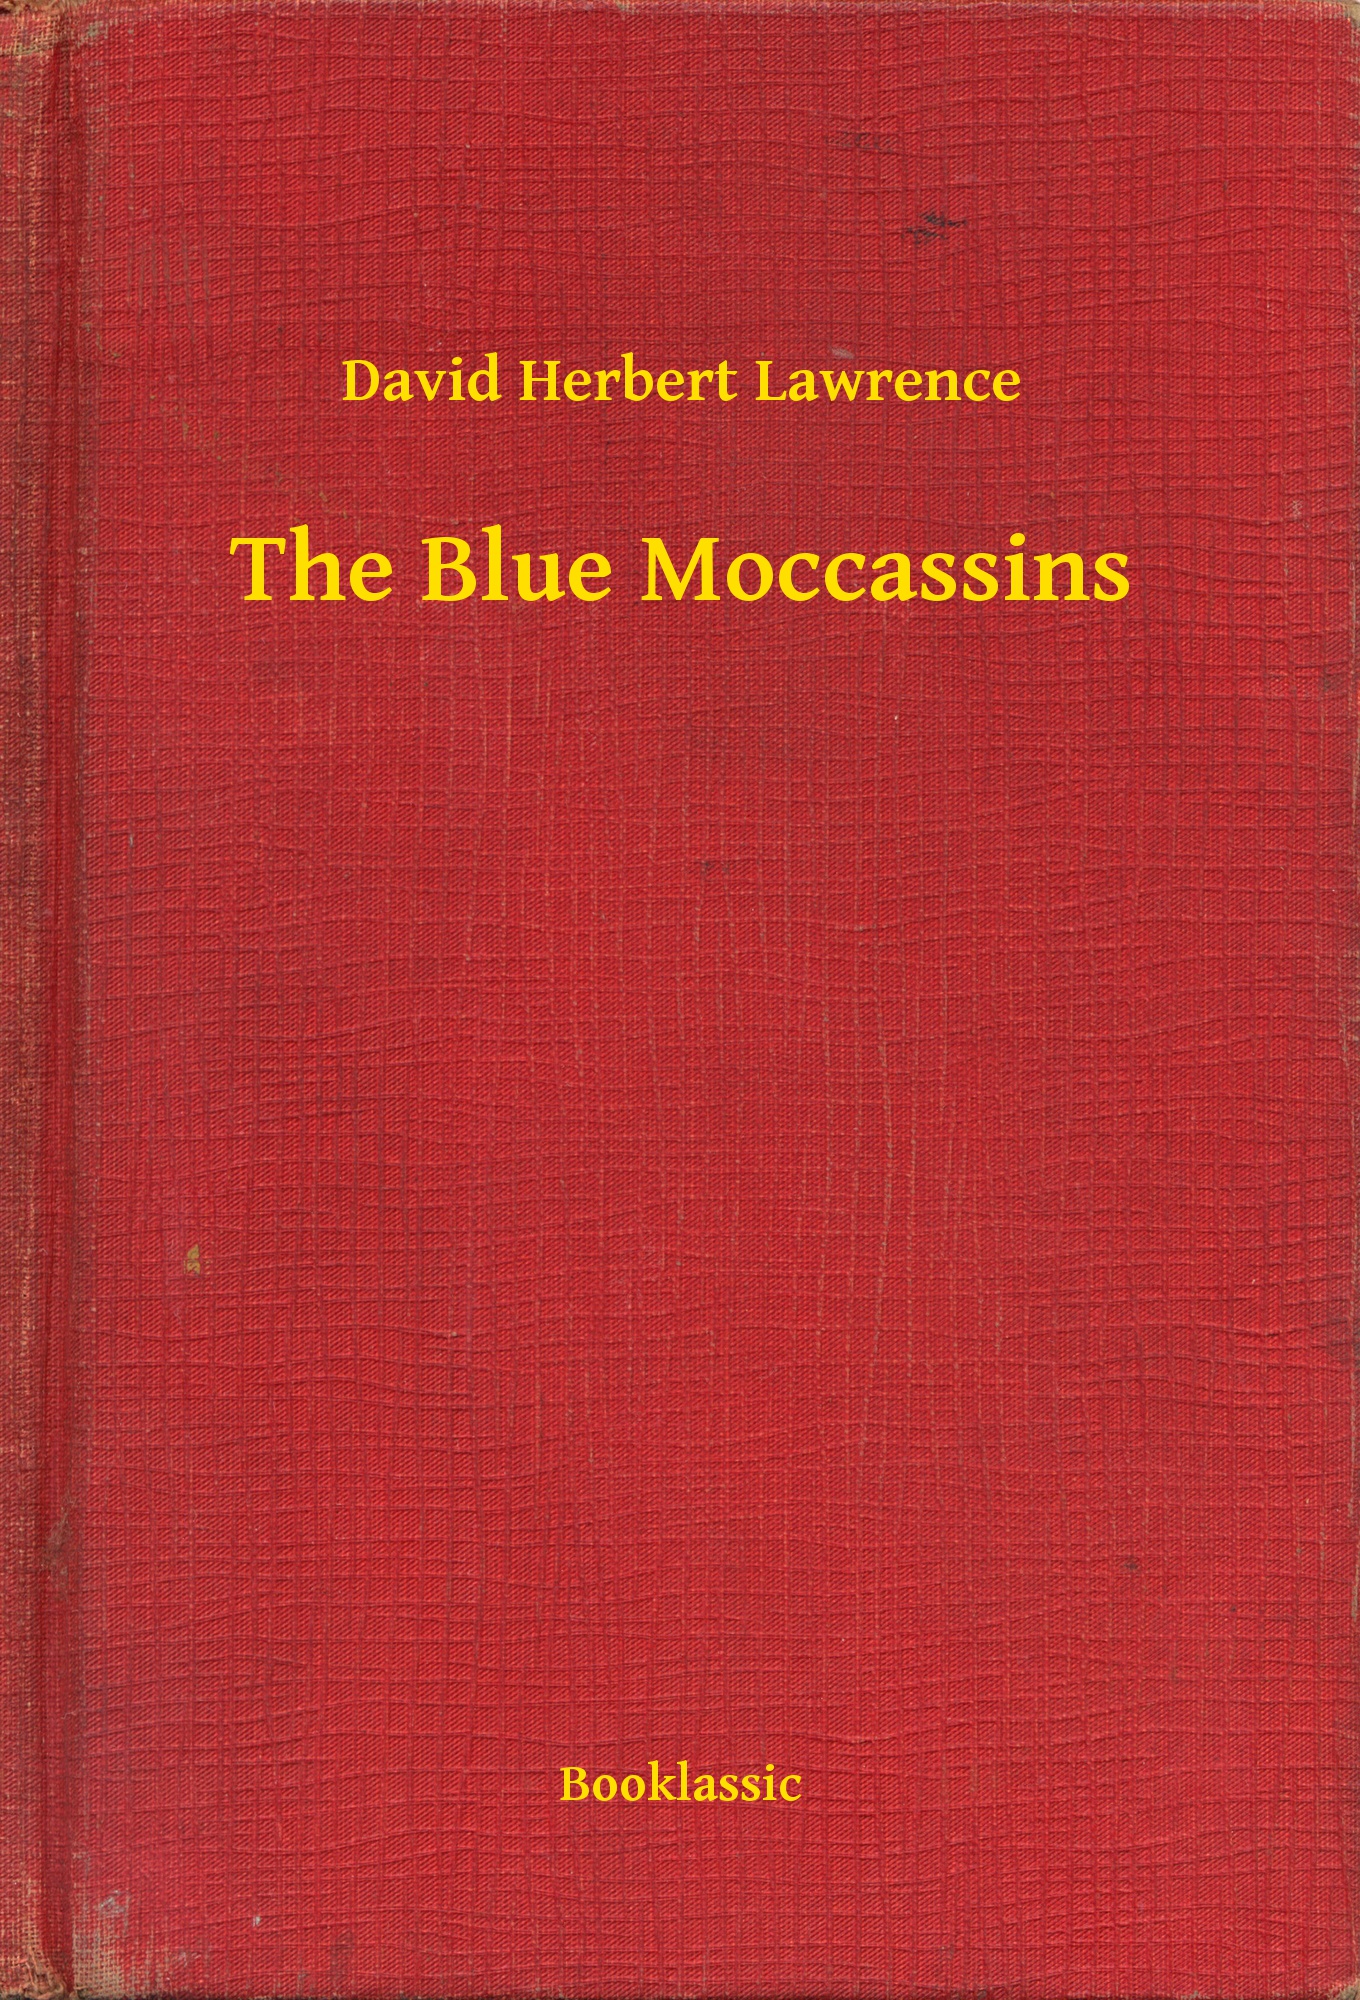 The Blue Moccassins